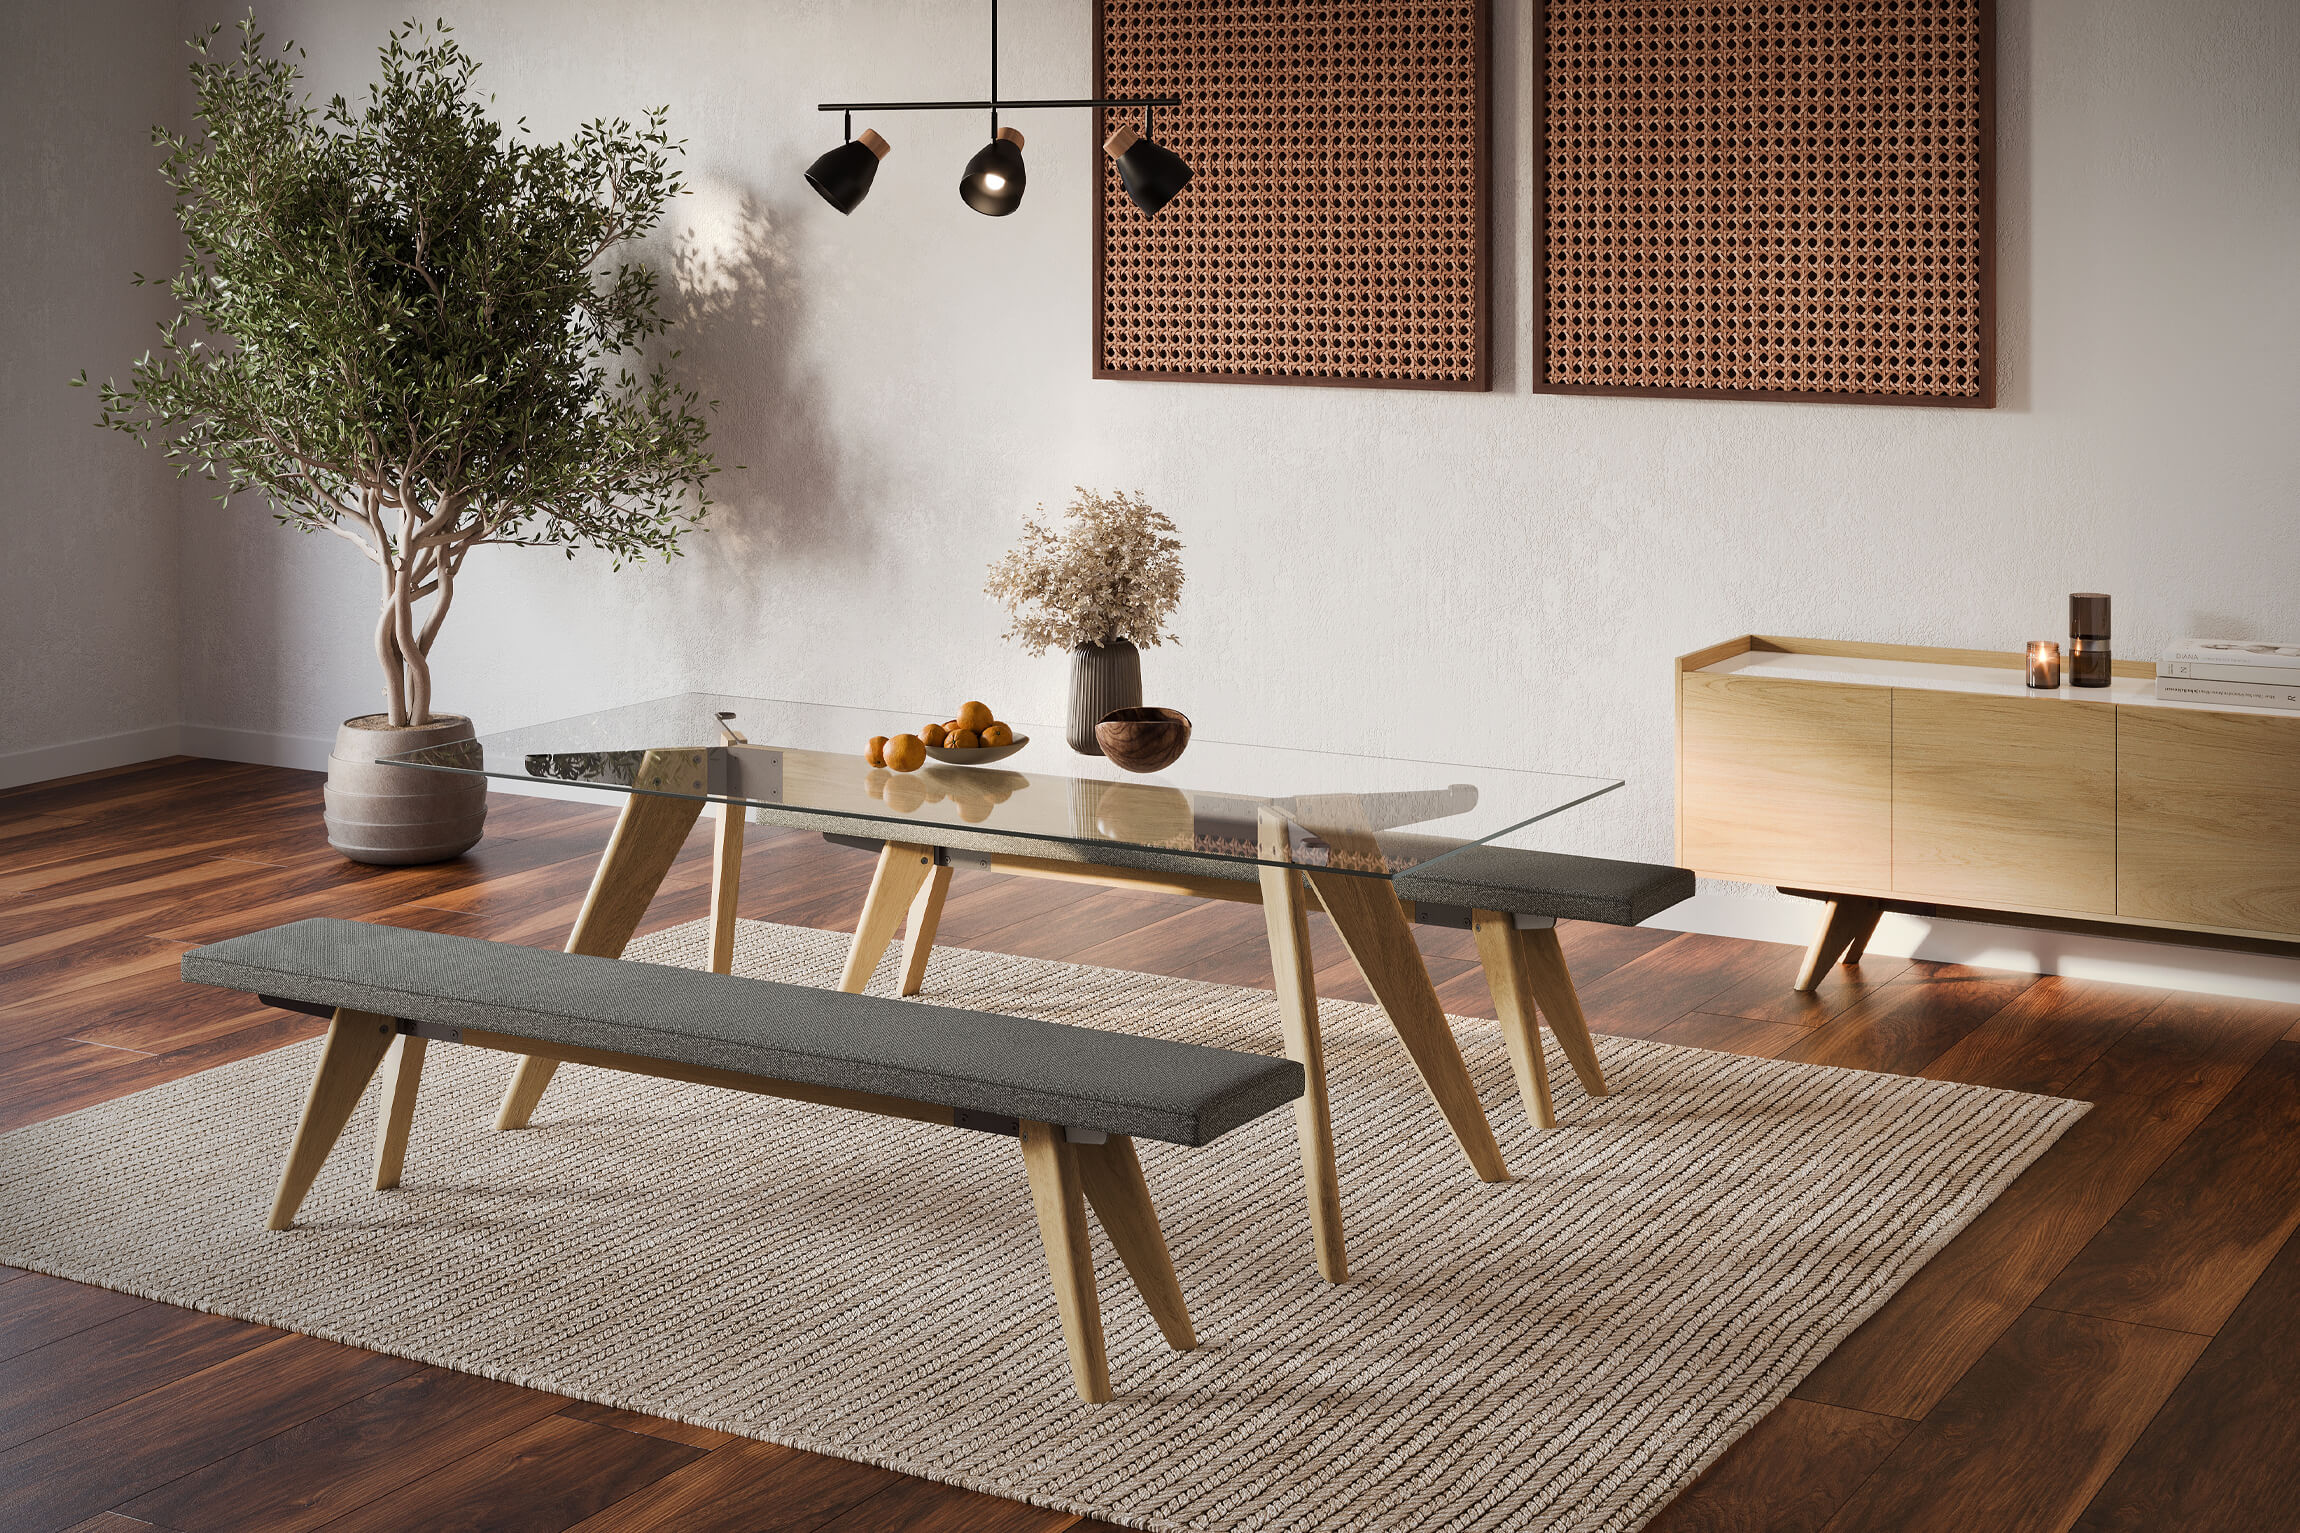 Lifestyle 3D Rendering of Dining Room Furniture